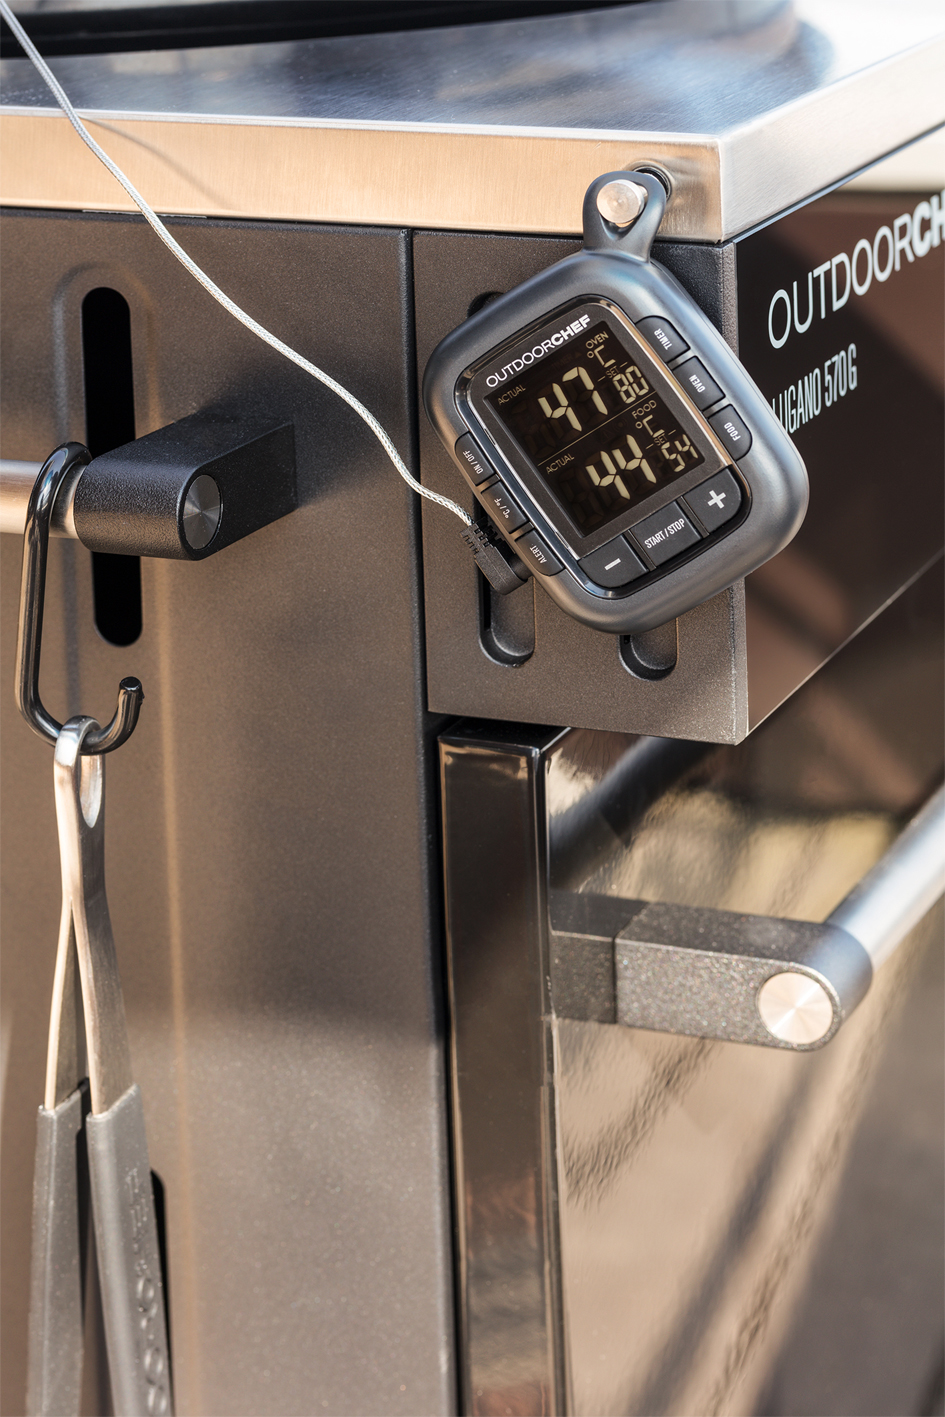 OutdoorCHEF Gourmet Check Thermometer